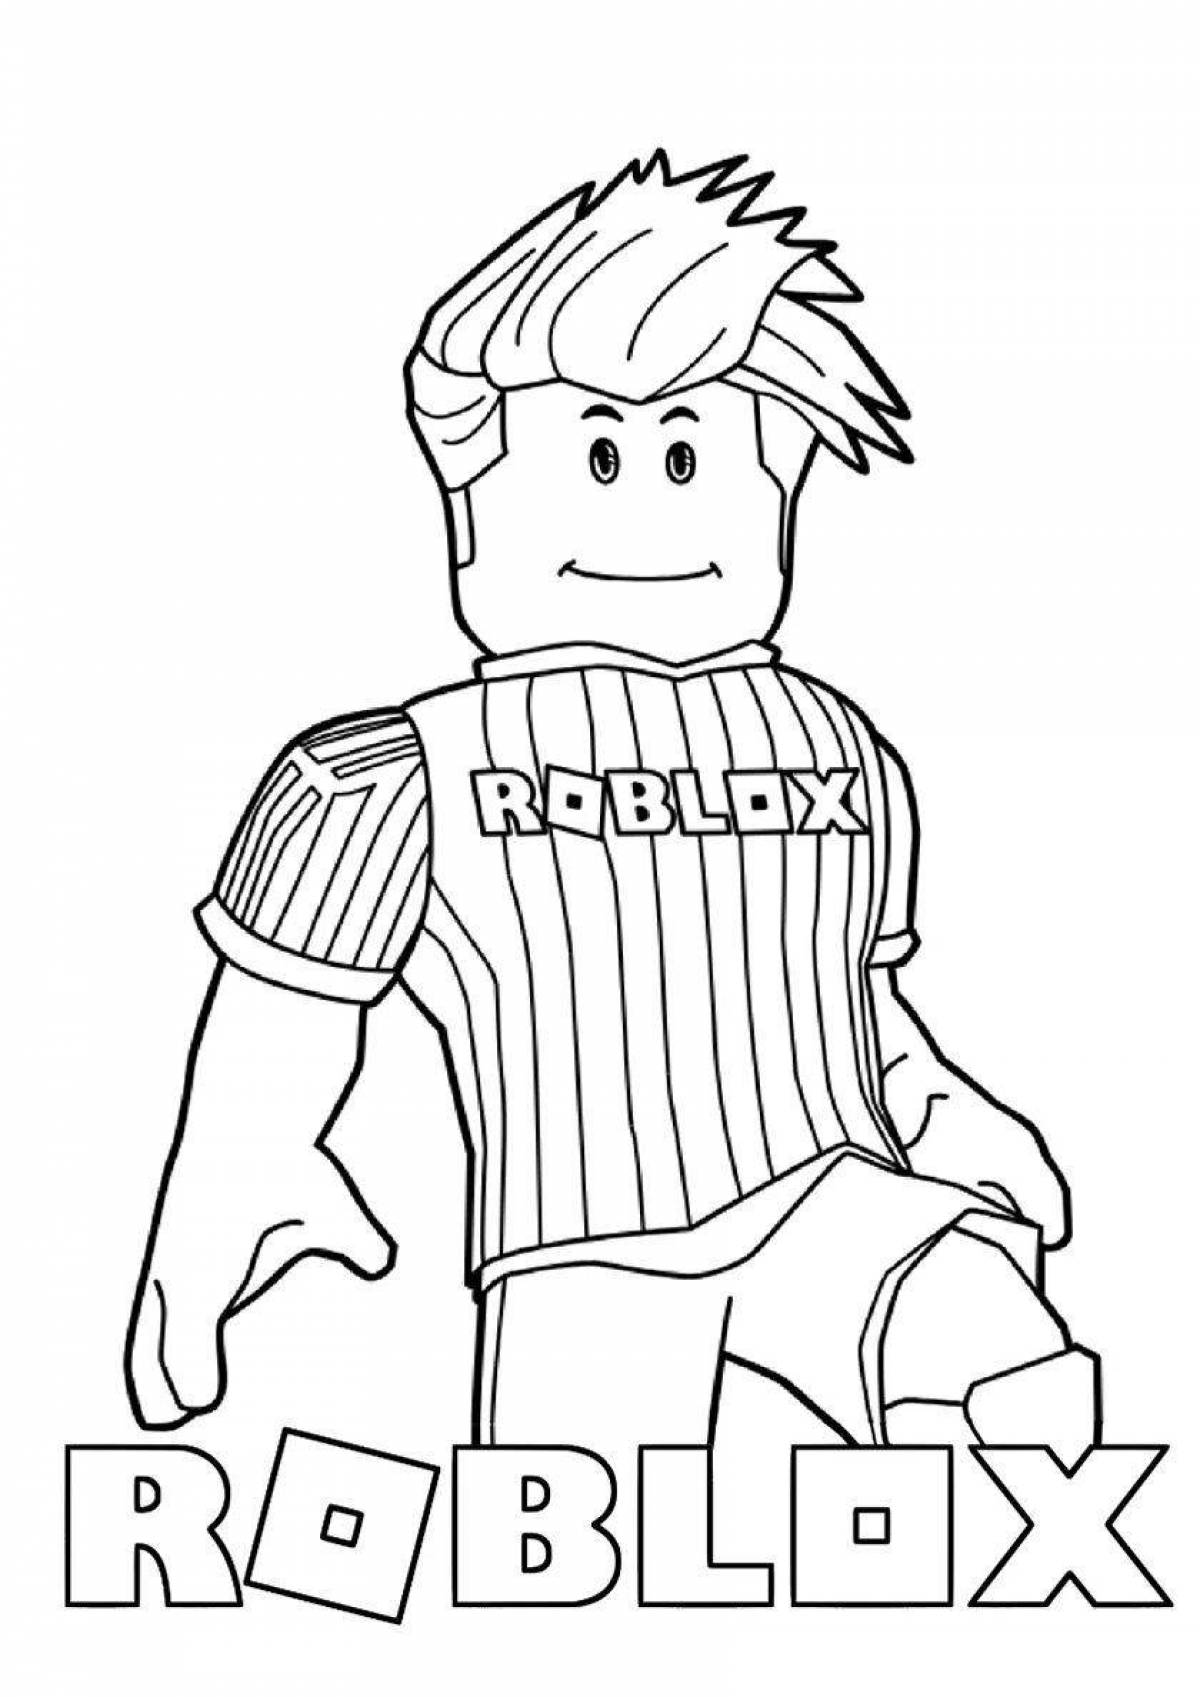 Glorious queen of roblox from tik tok